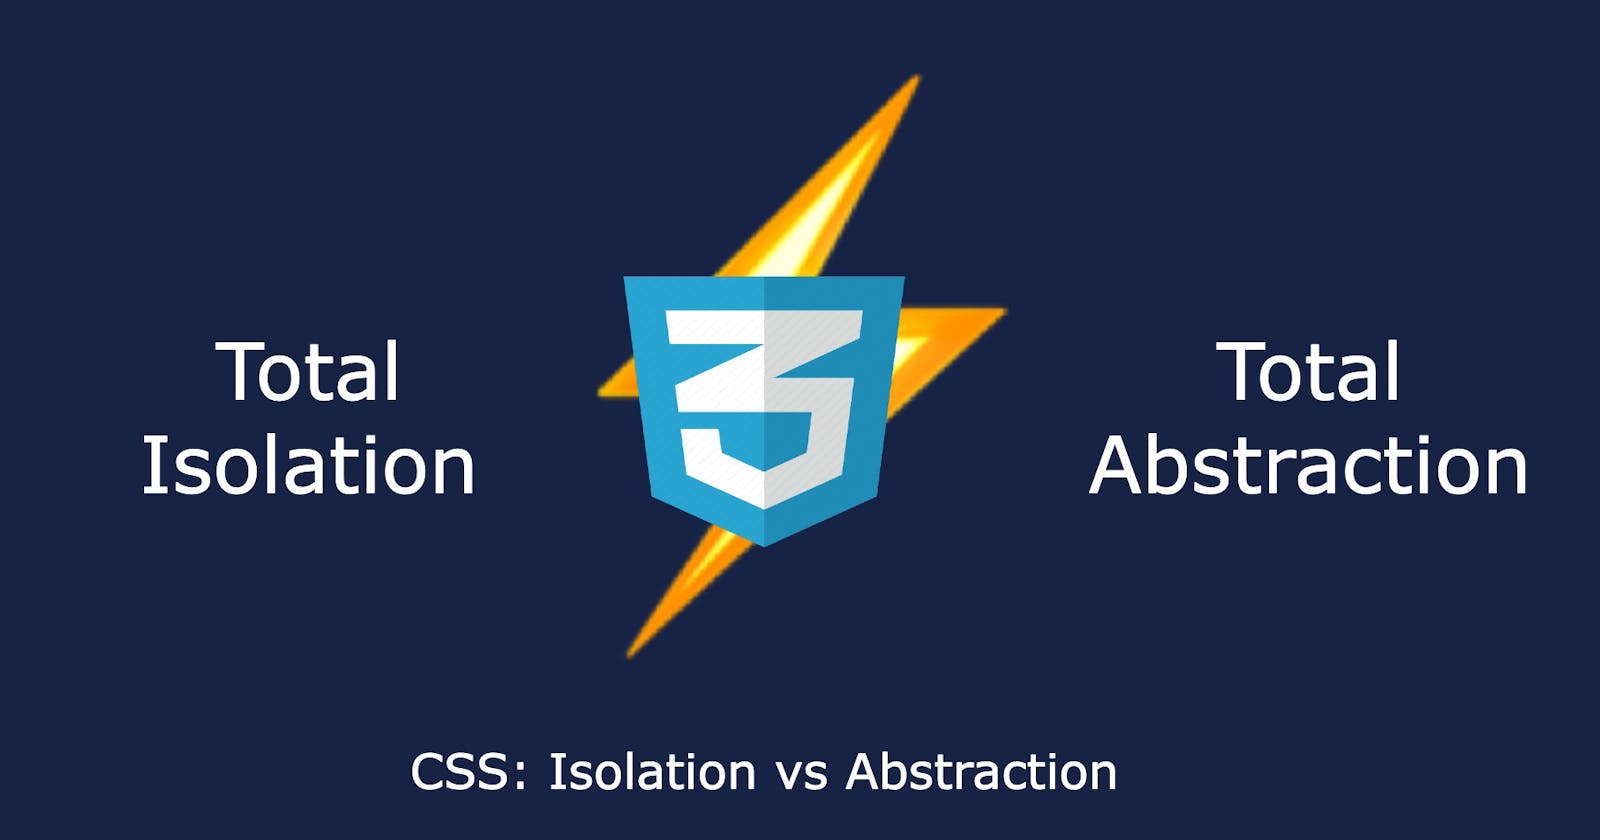 CSS: Isolation vs Abstraction